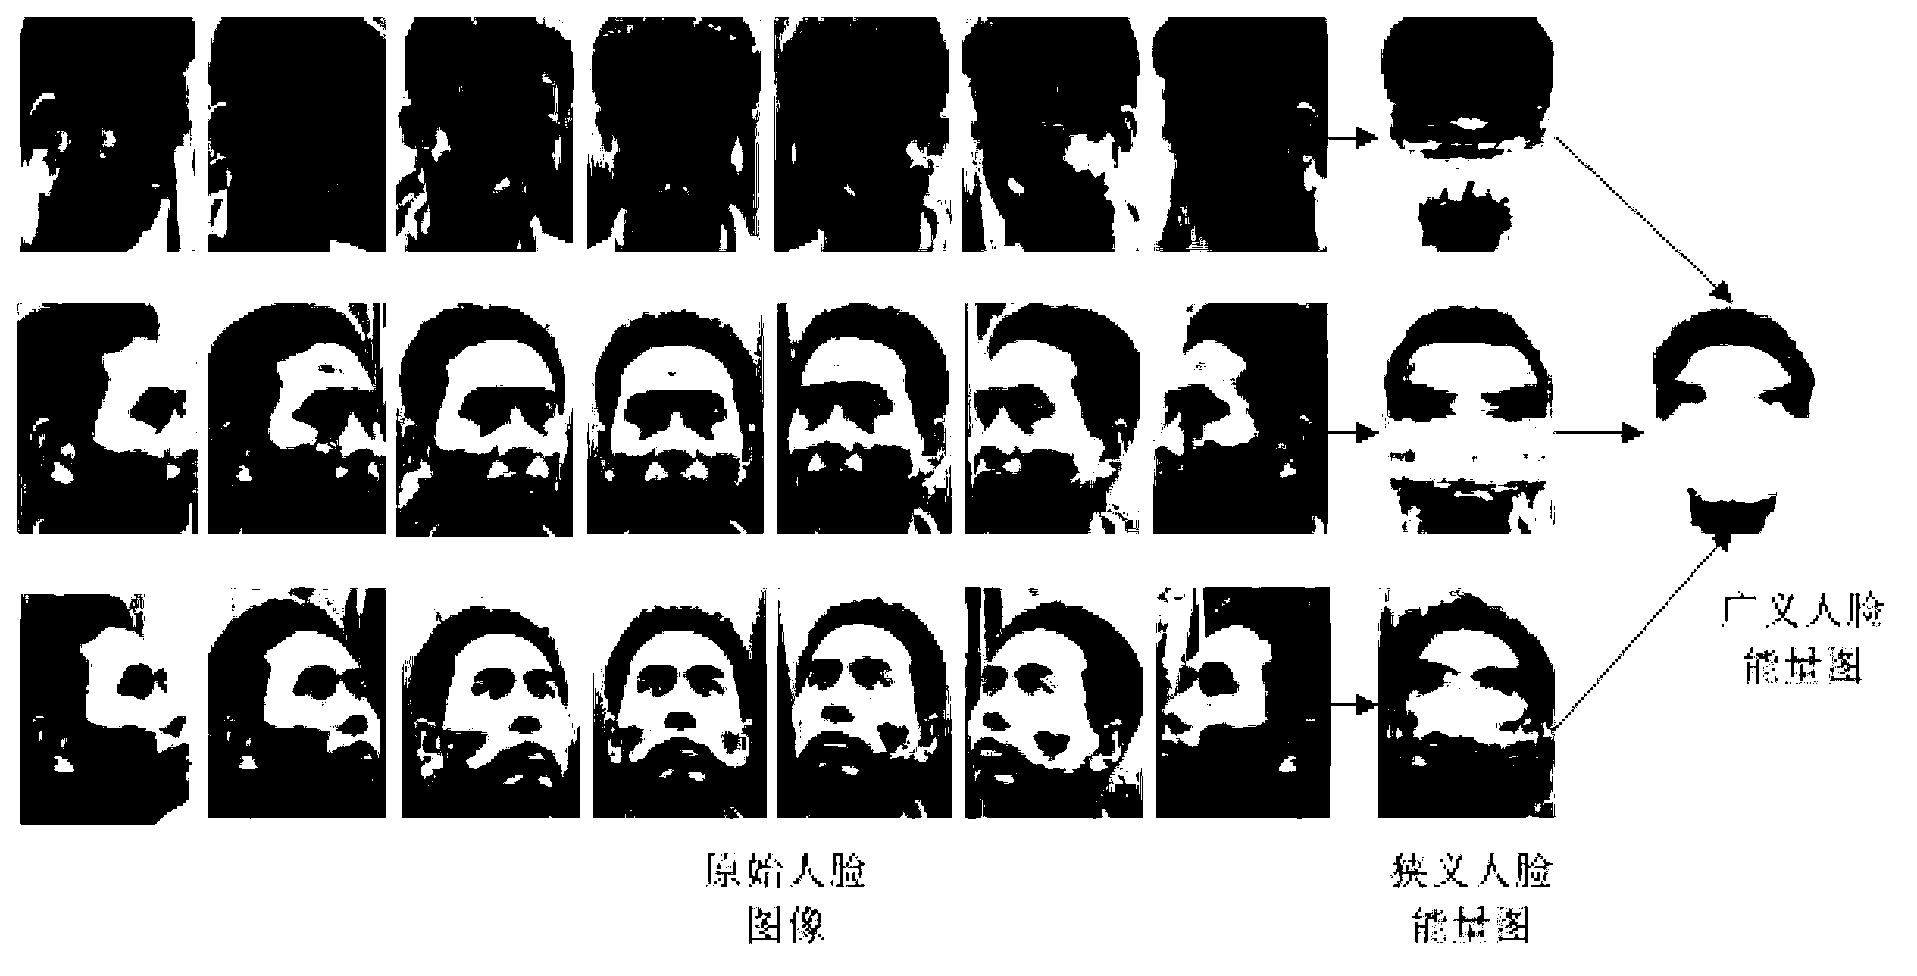 Multi-pose face recognition method based on face mean and variance energy images